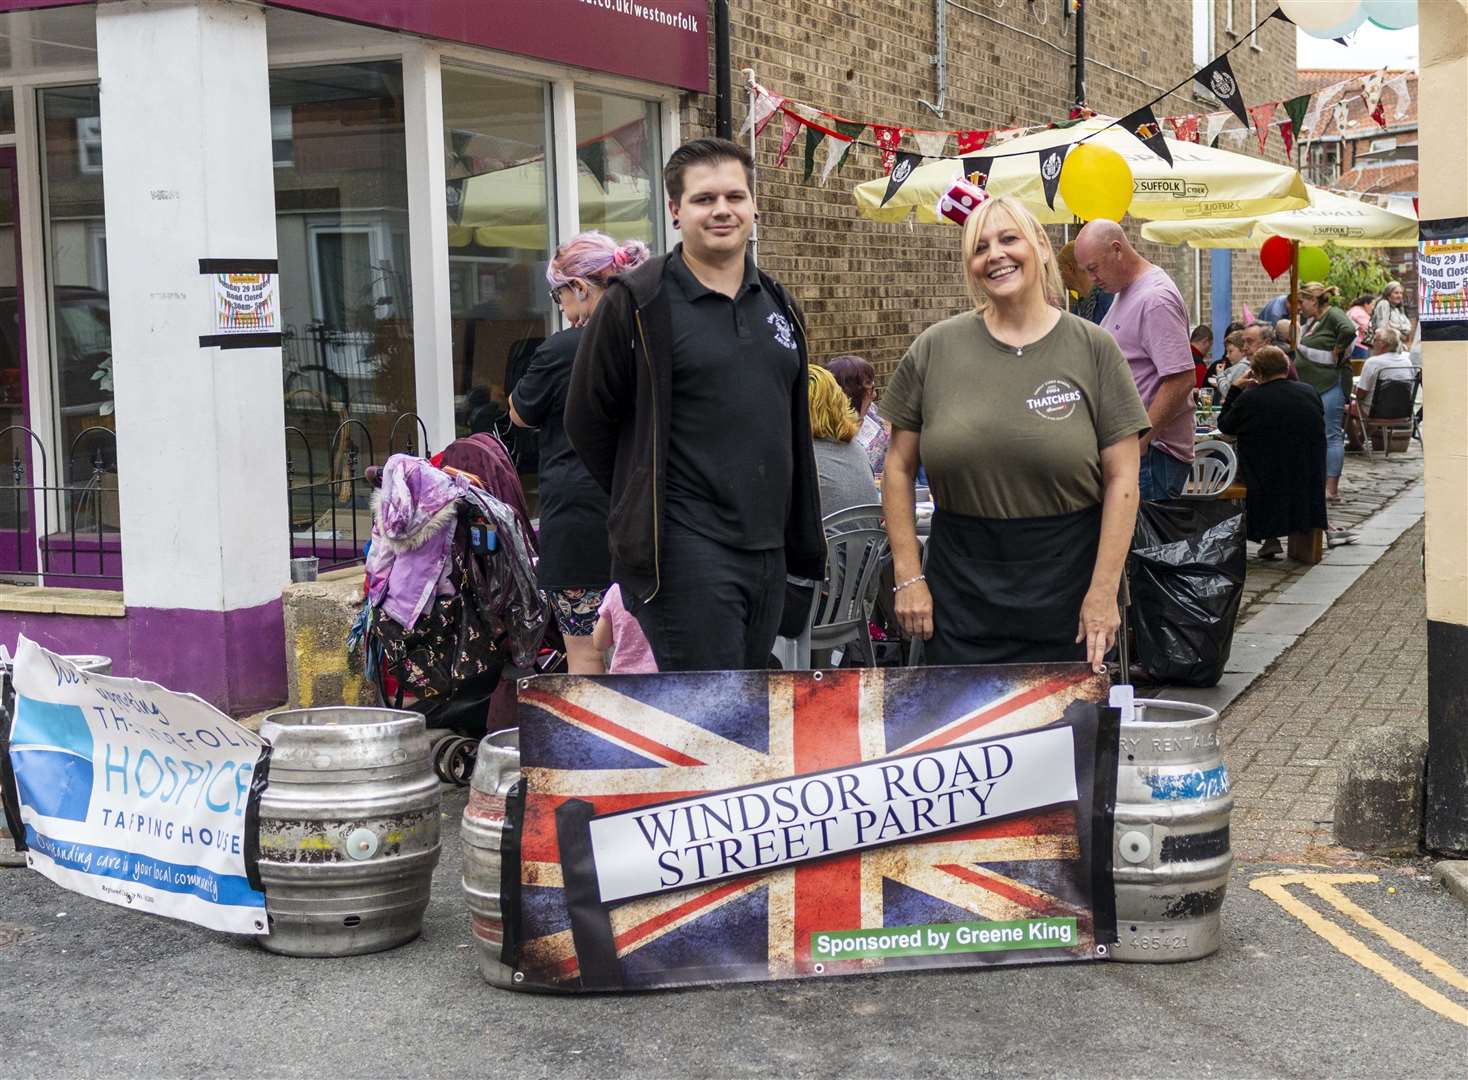 A previous Windsor Road street party raised funds for Tapping House